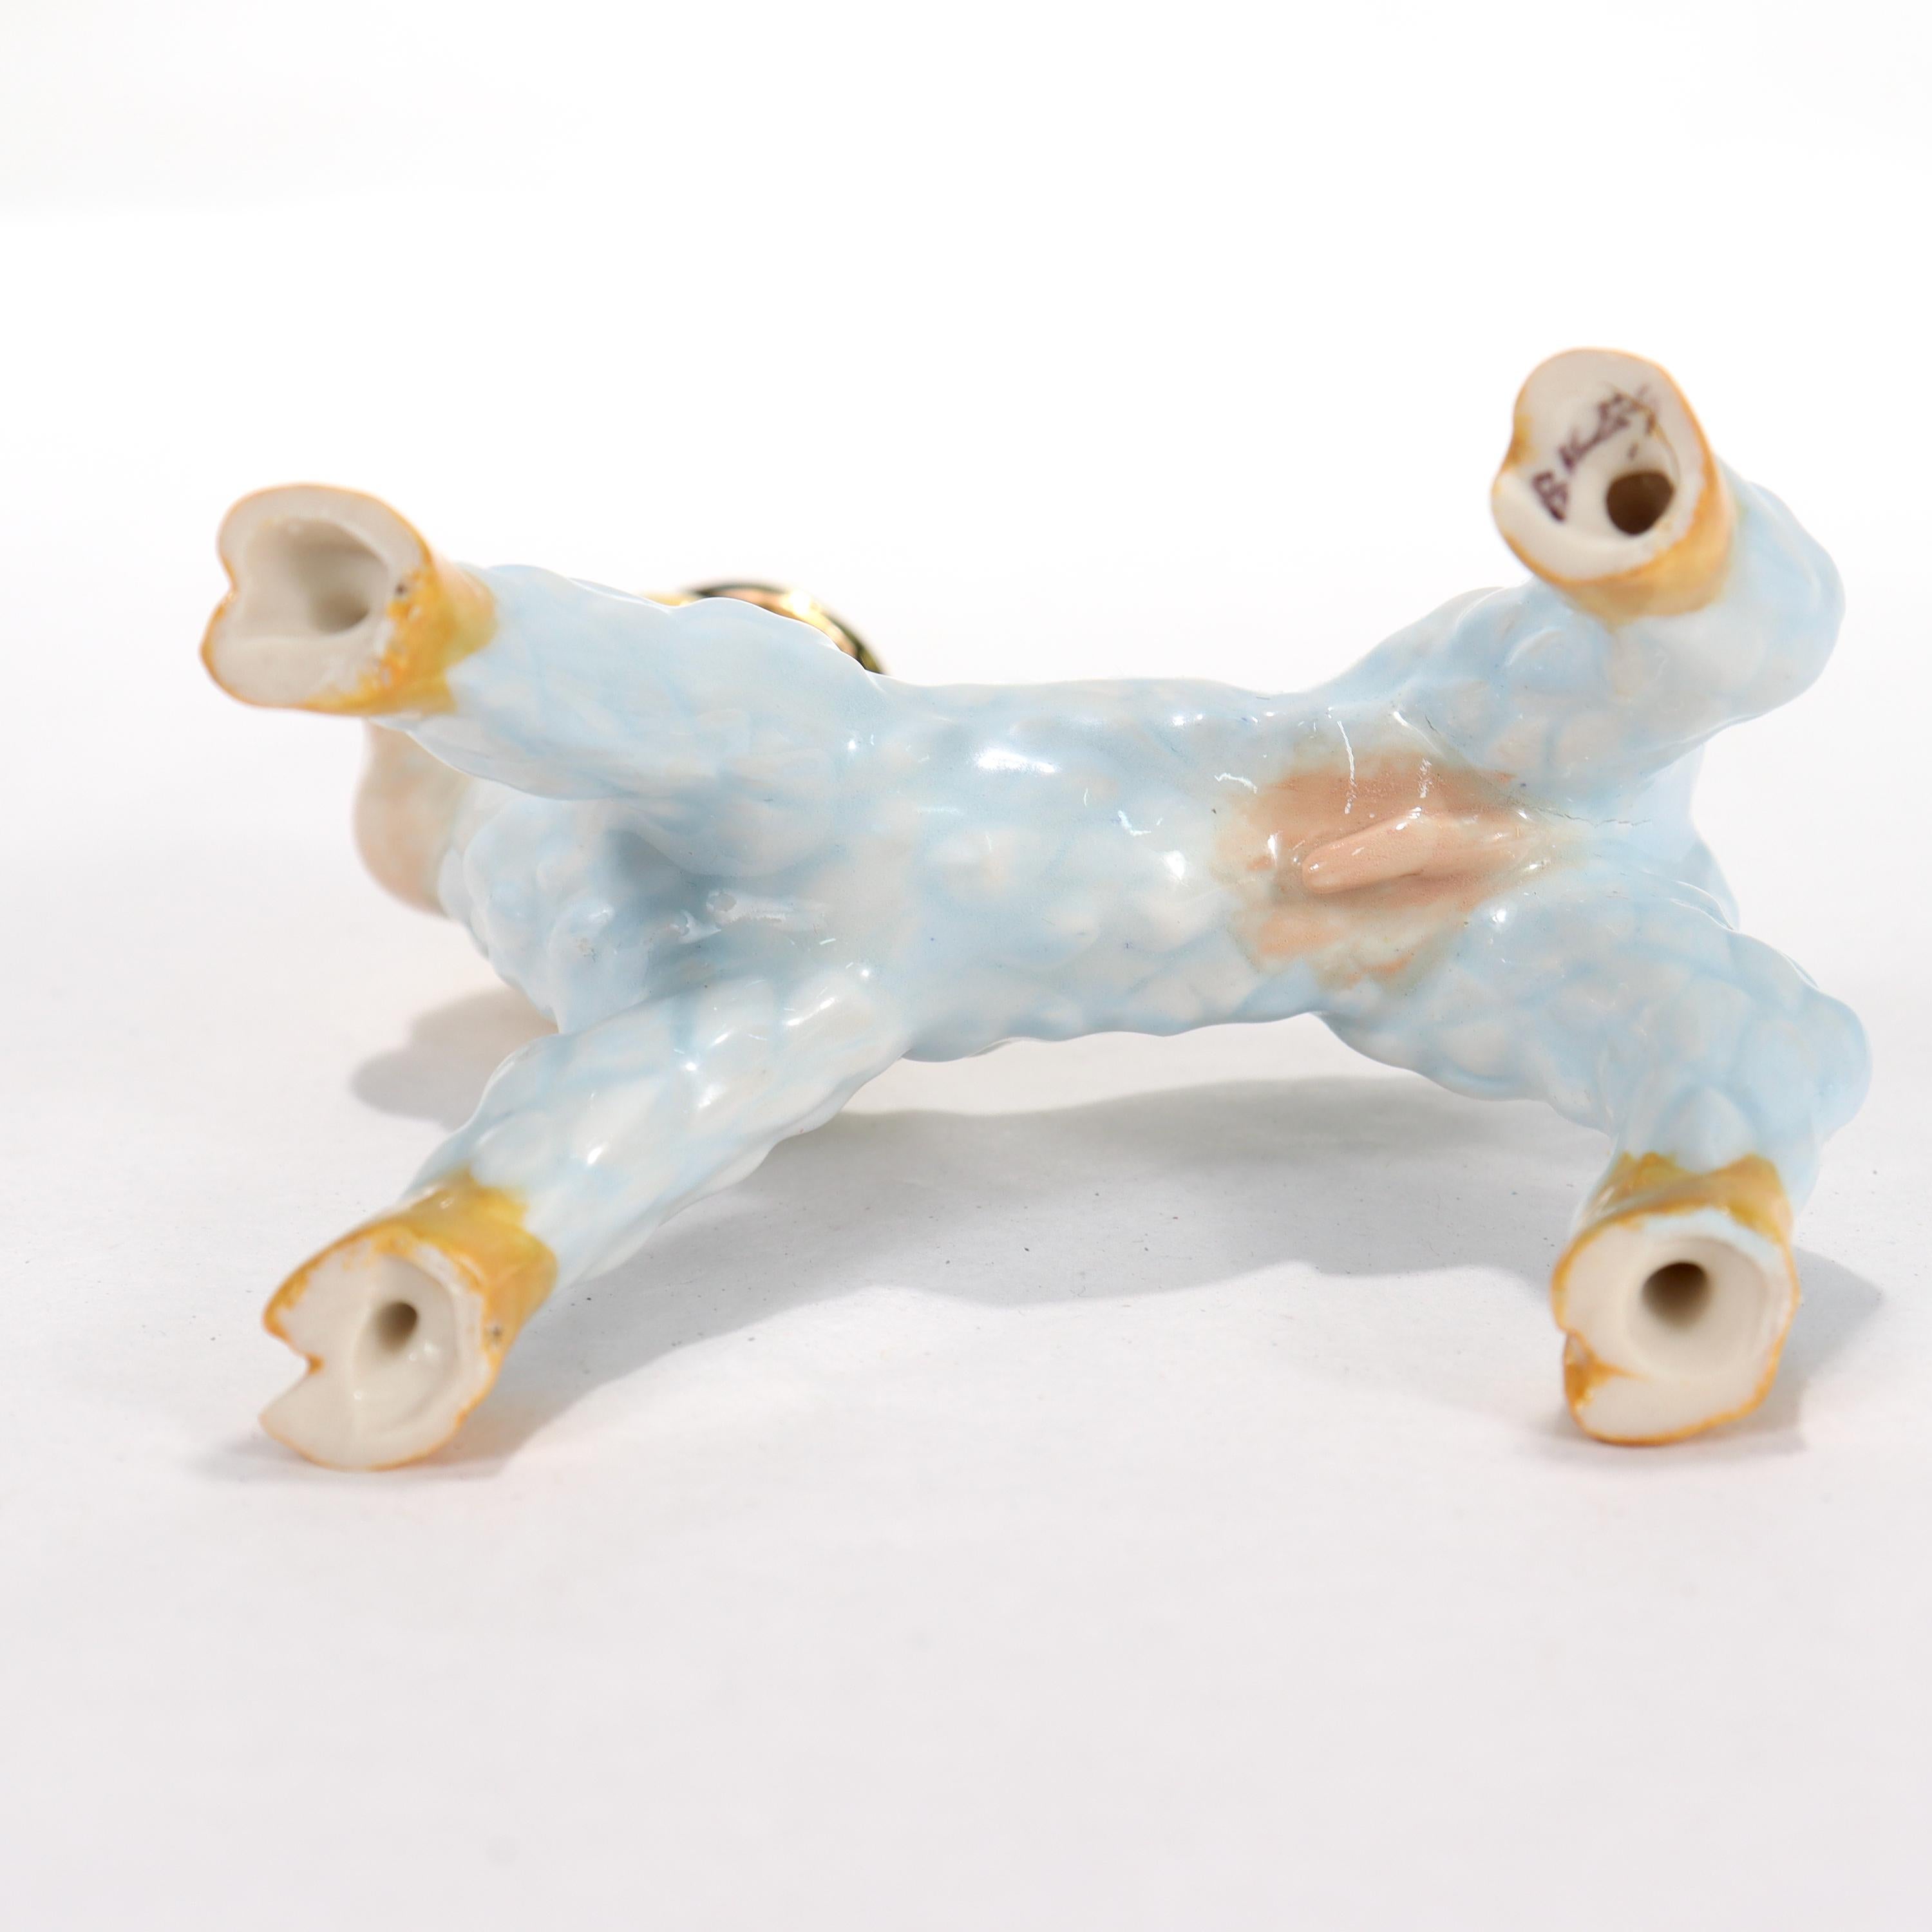 Contemporary Russel Biles 'Mary Had a Little Lamb' Porcelain Figurine